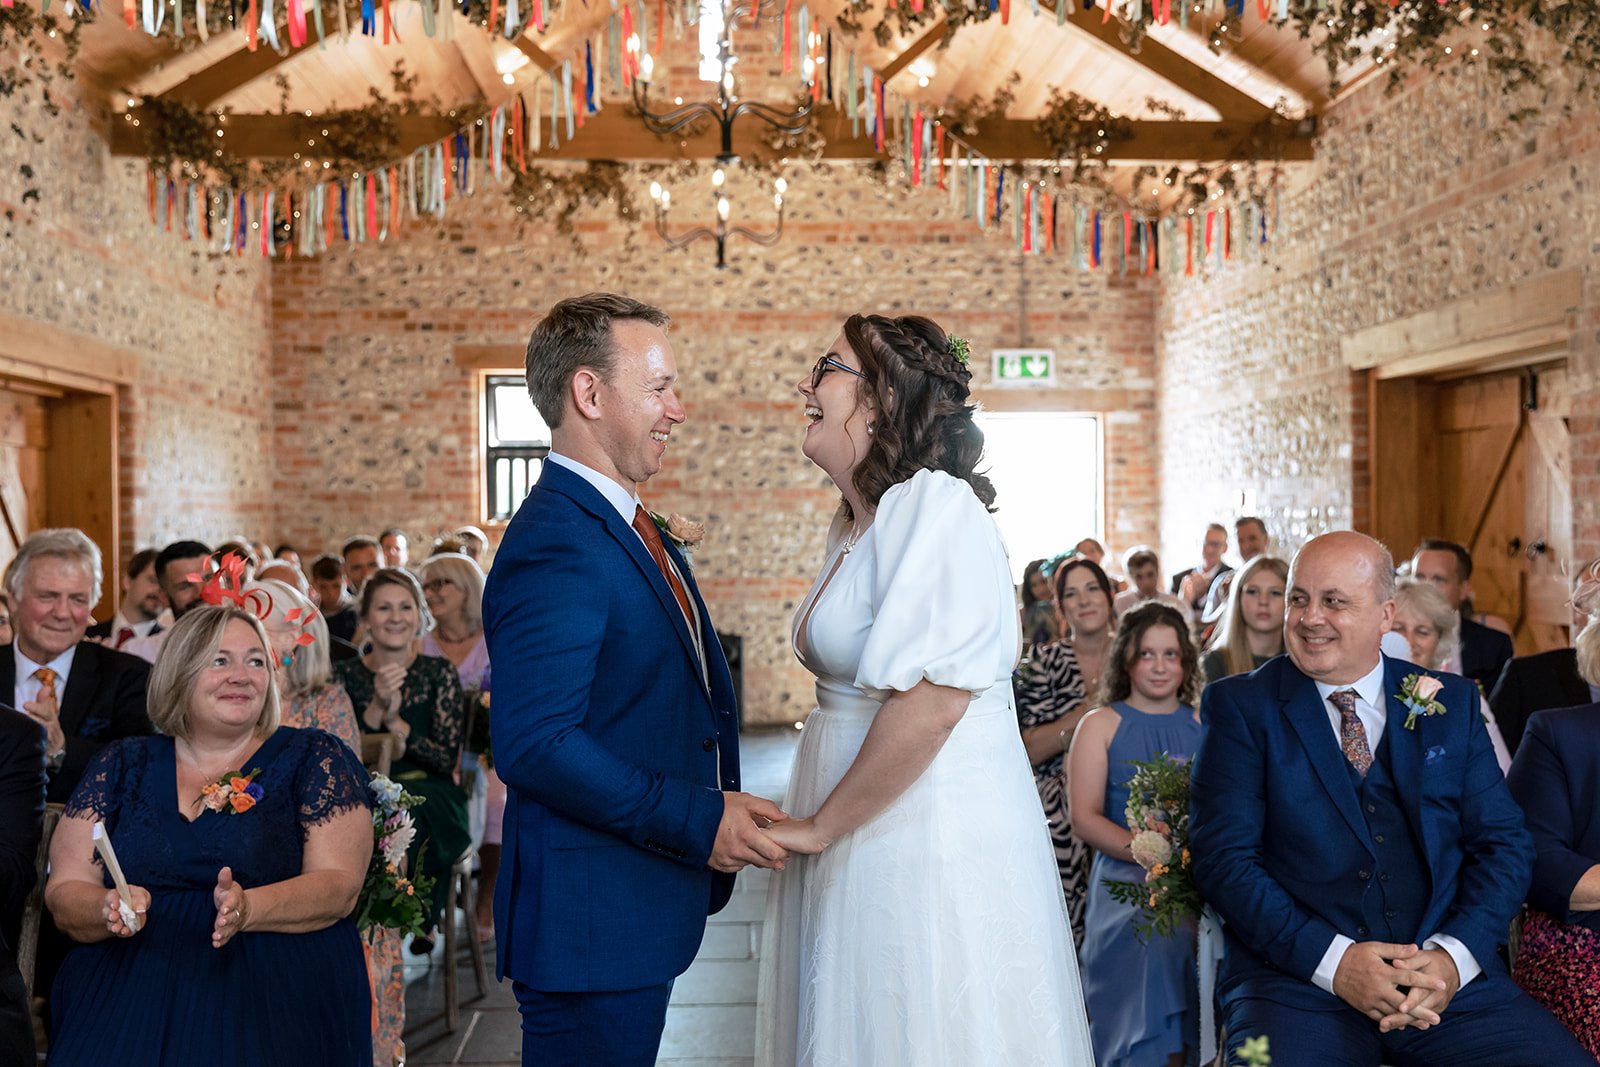 Bride and groom laughing as they say their vows in front of guests in a rustic barn wedding venue